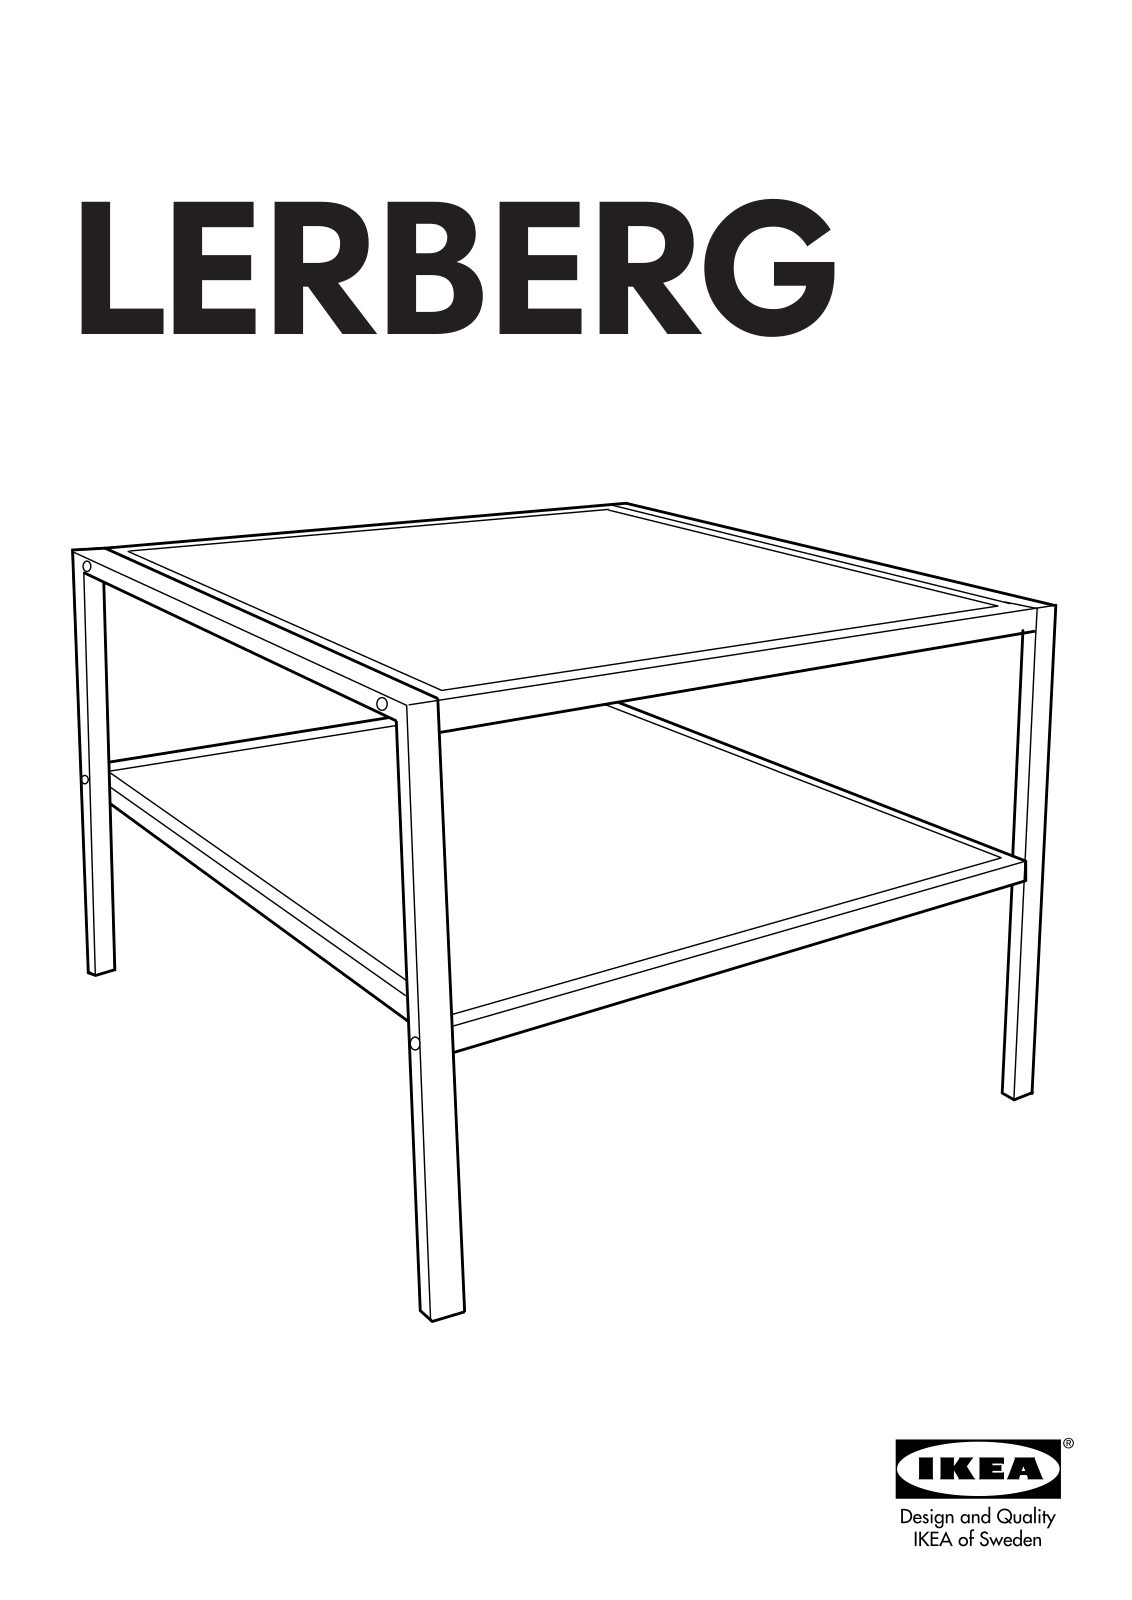 IKEA LERBERG TV BENCH-COFFEE TABLE 24X21 Assembly Instruction